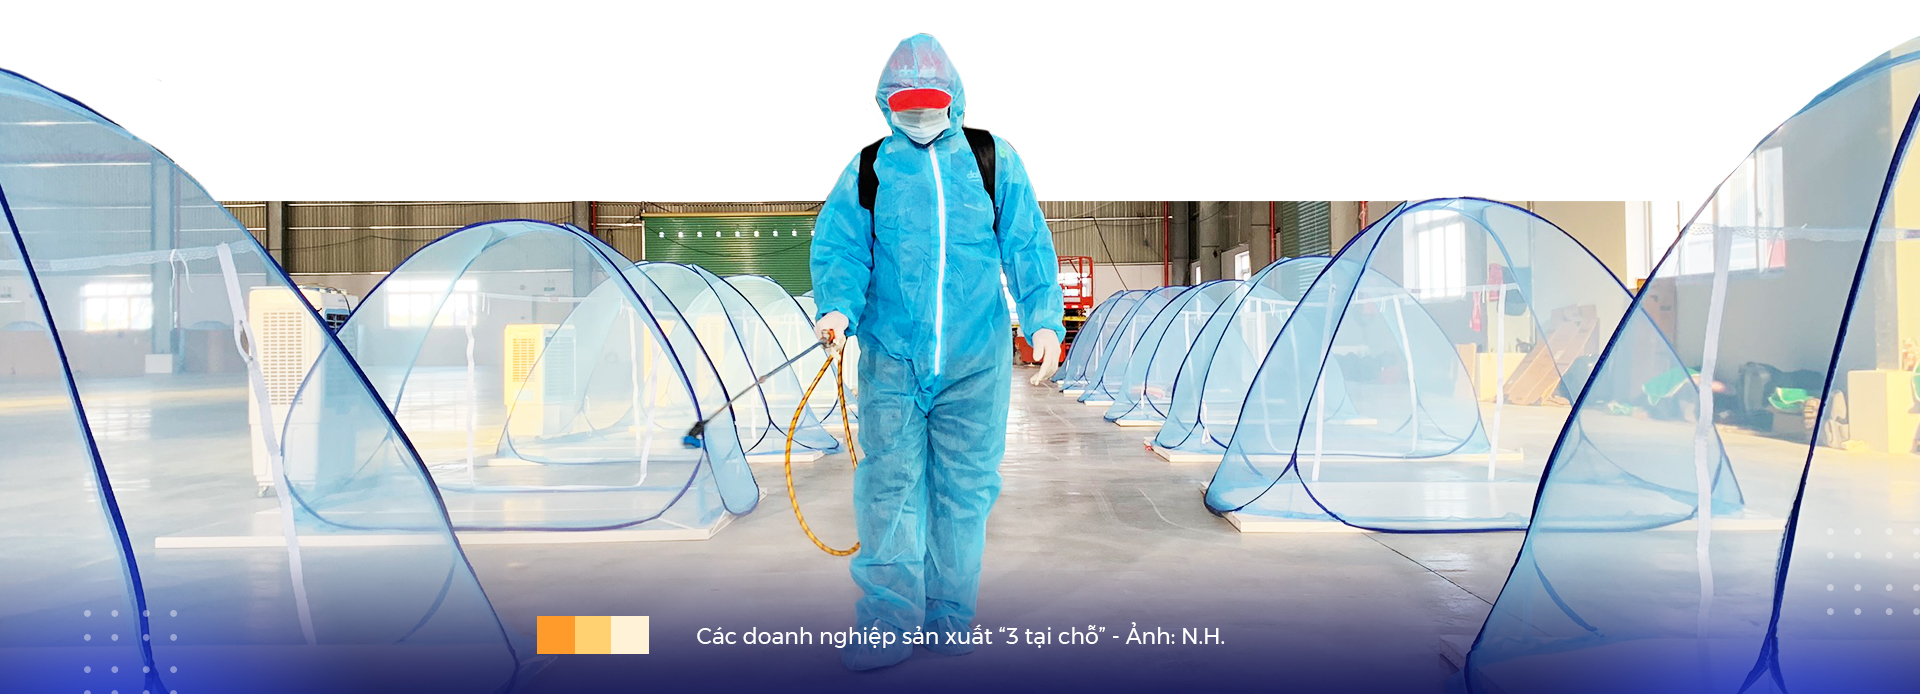 A health worker disinfects a factory following the ‘stay-at-work’ mode during the fourth wave of the COVID-19 pandemic in Vietnam. Photo: N.H. / Tuoi Tre